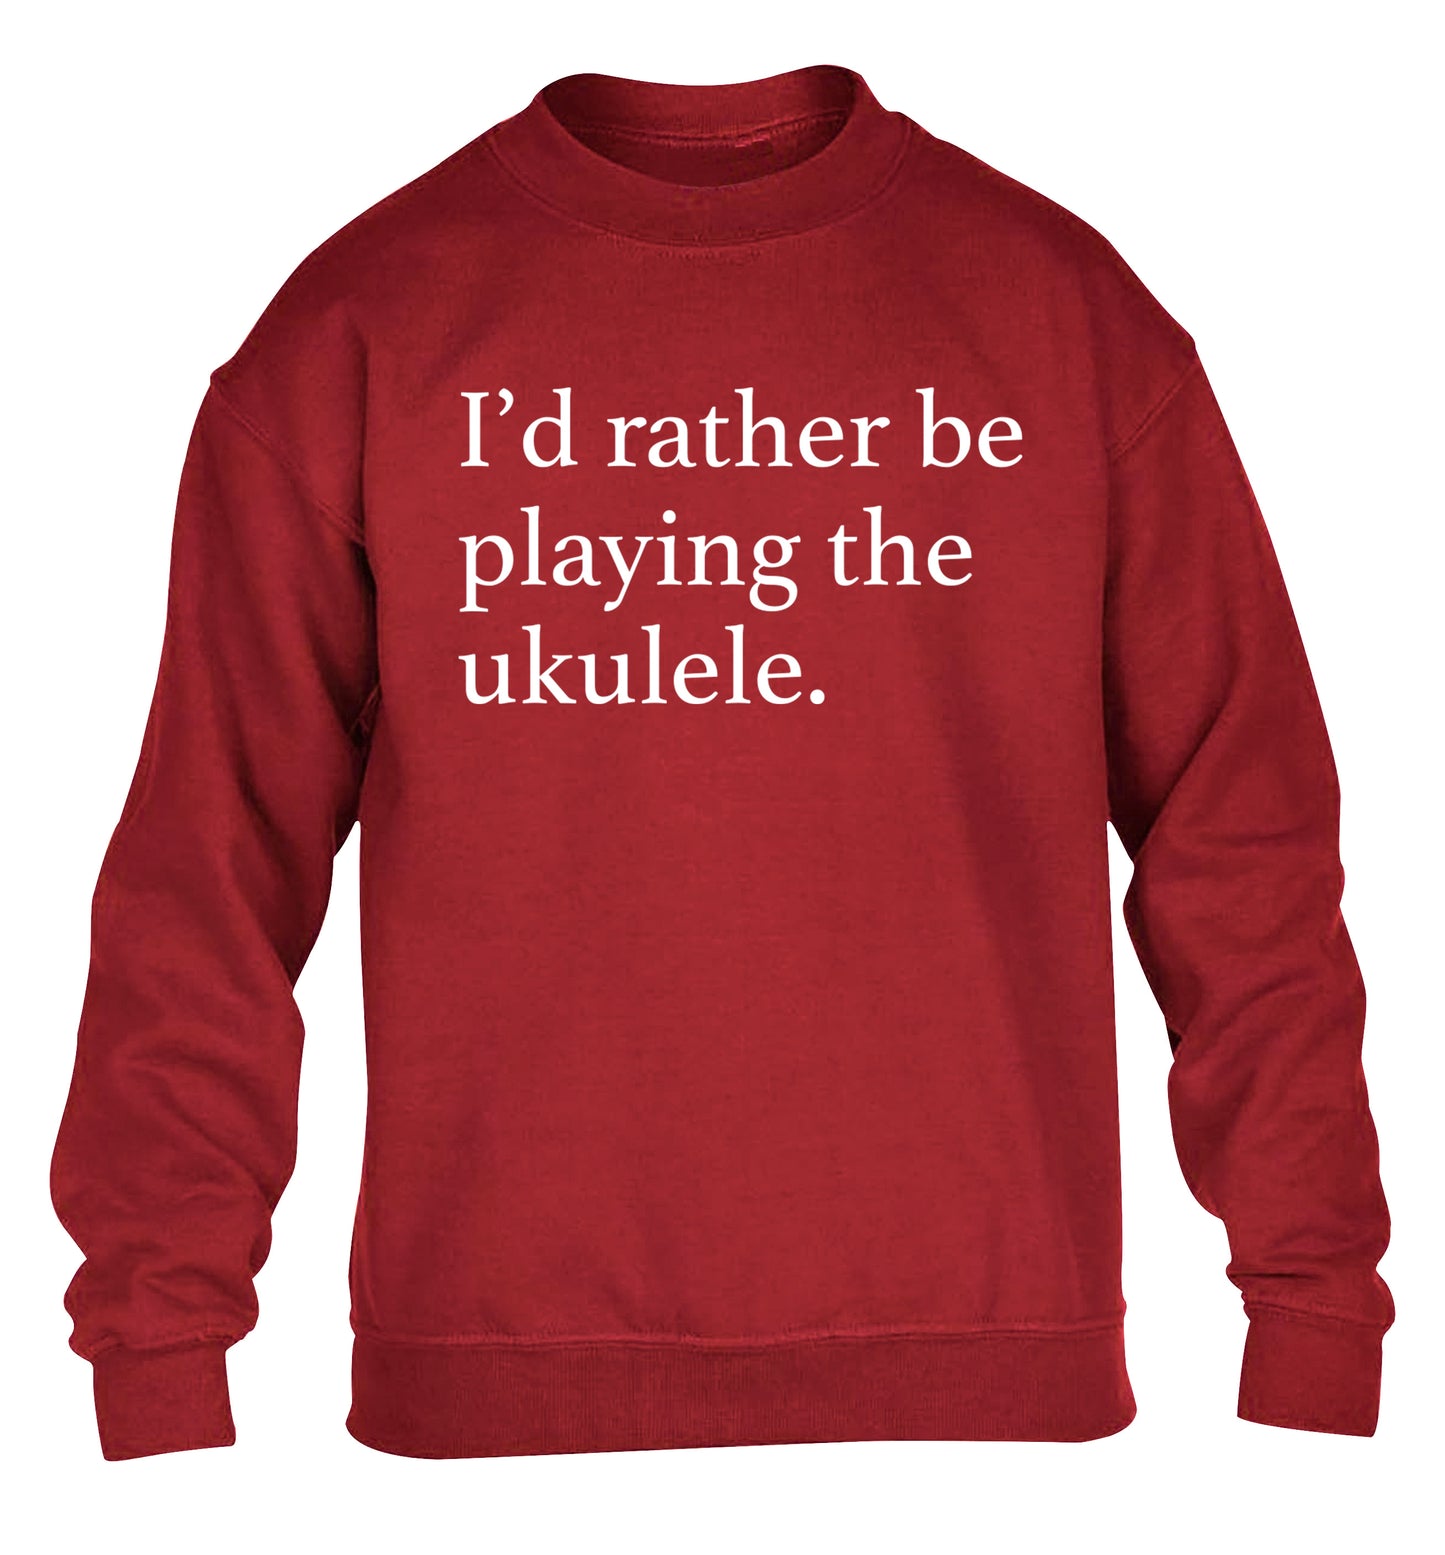 I'd rather by playing the ukulele children's grey sweater 12-14 Years